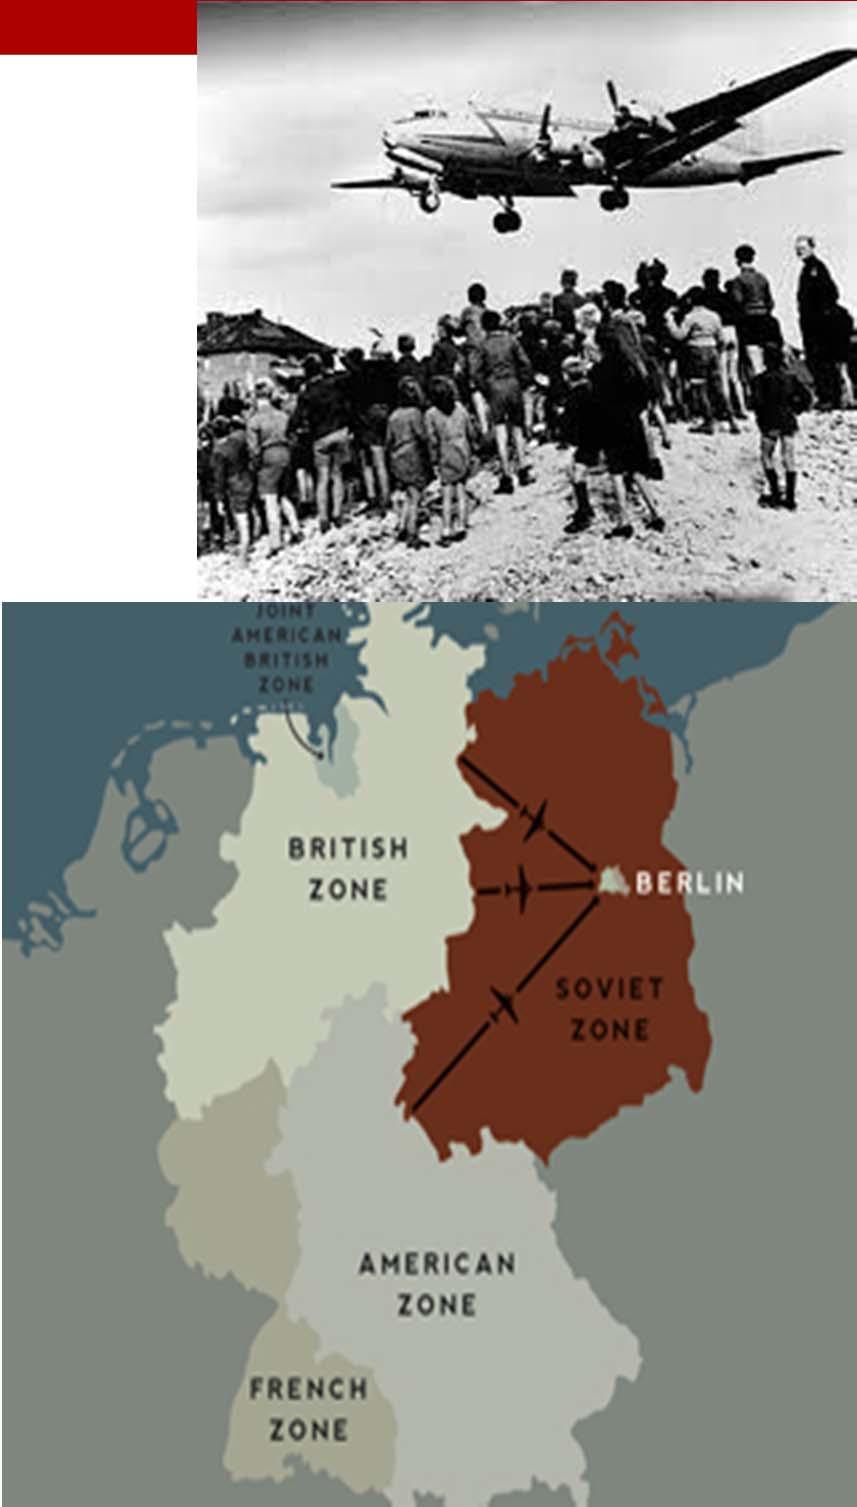 Berlin Blockade and Airlift (1948) Soviets blocked all routes into West Berlin (cut off food/coal; caused starvation and poverty) British